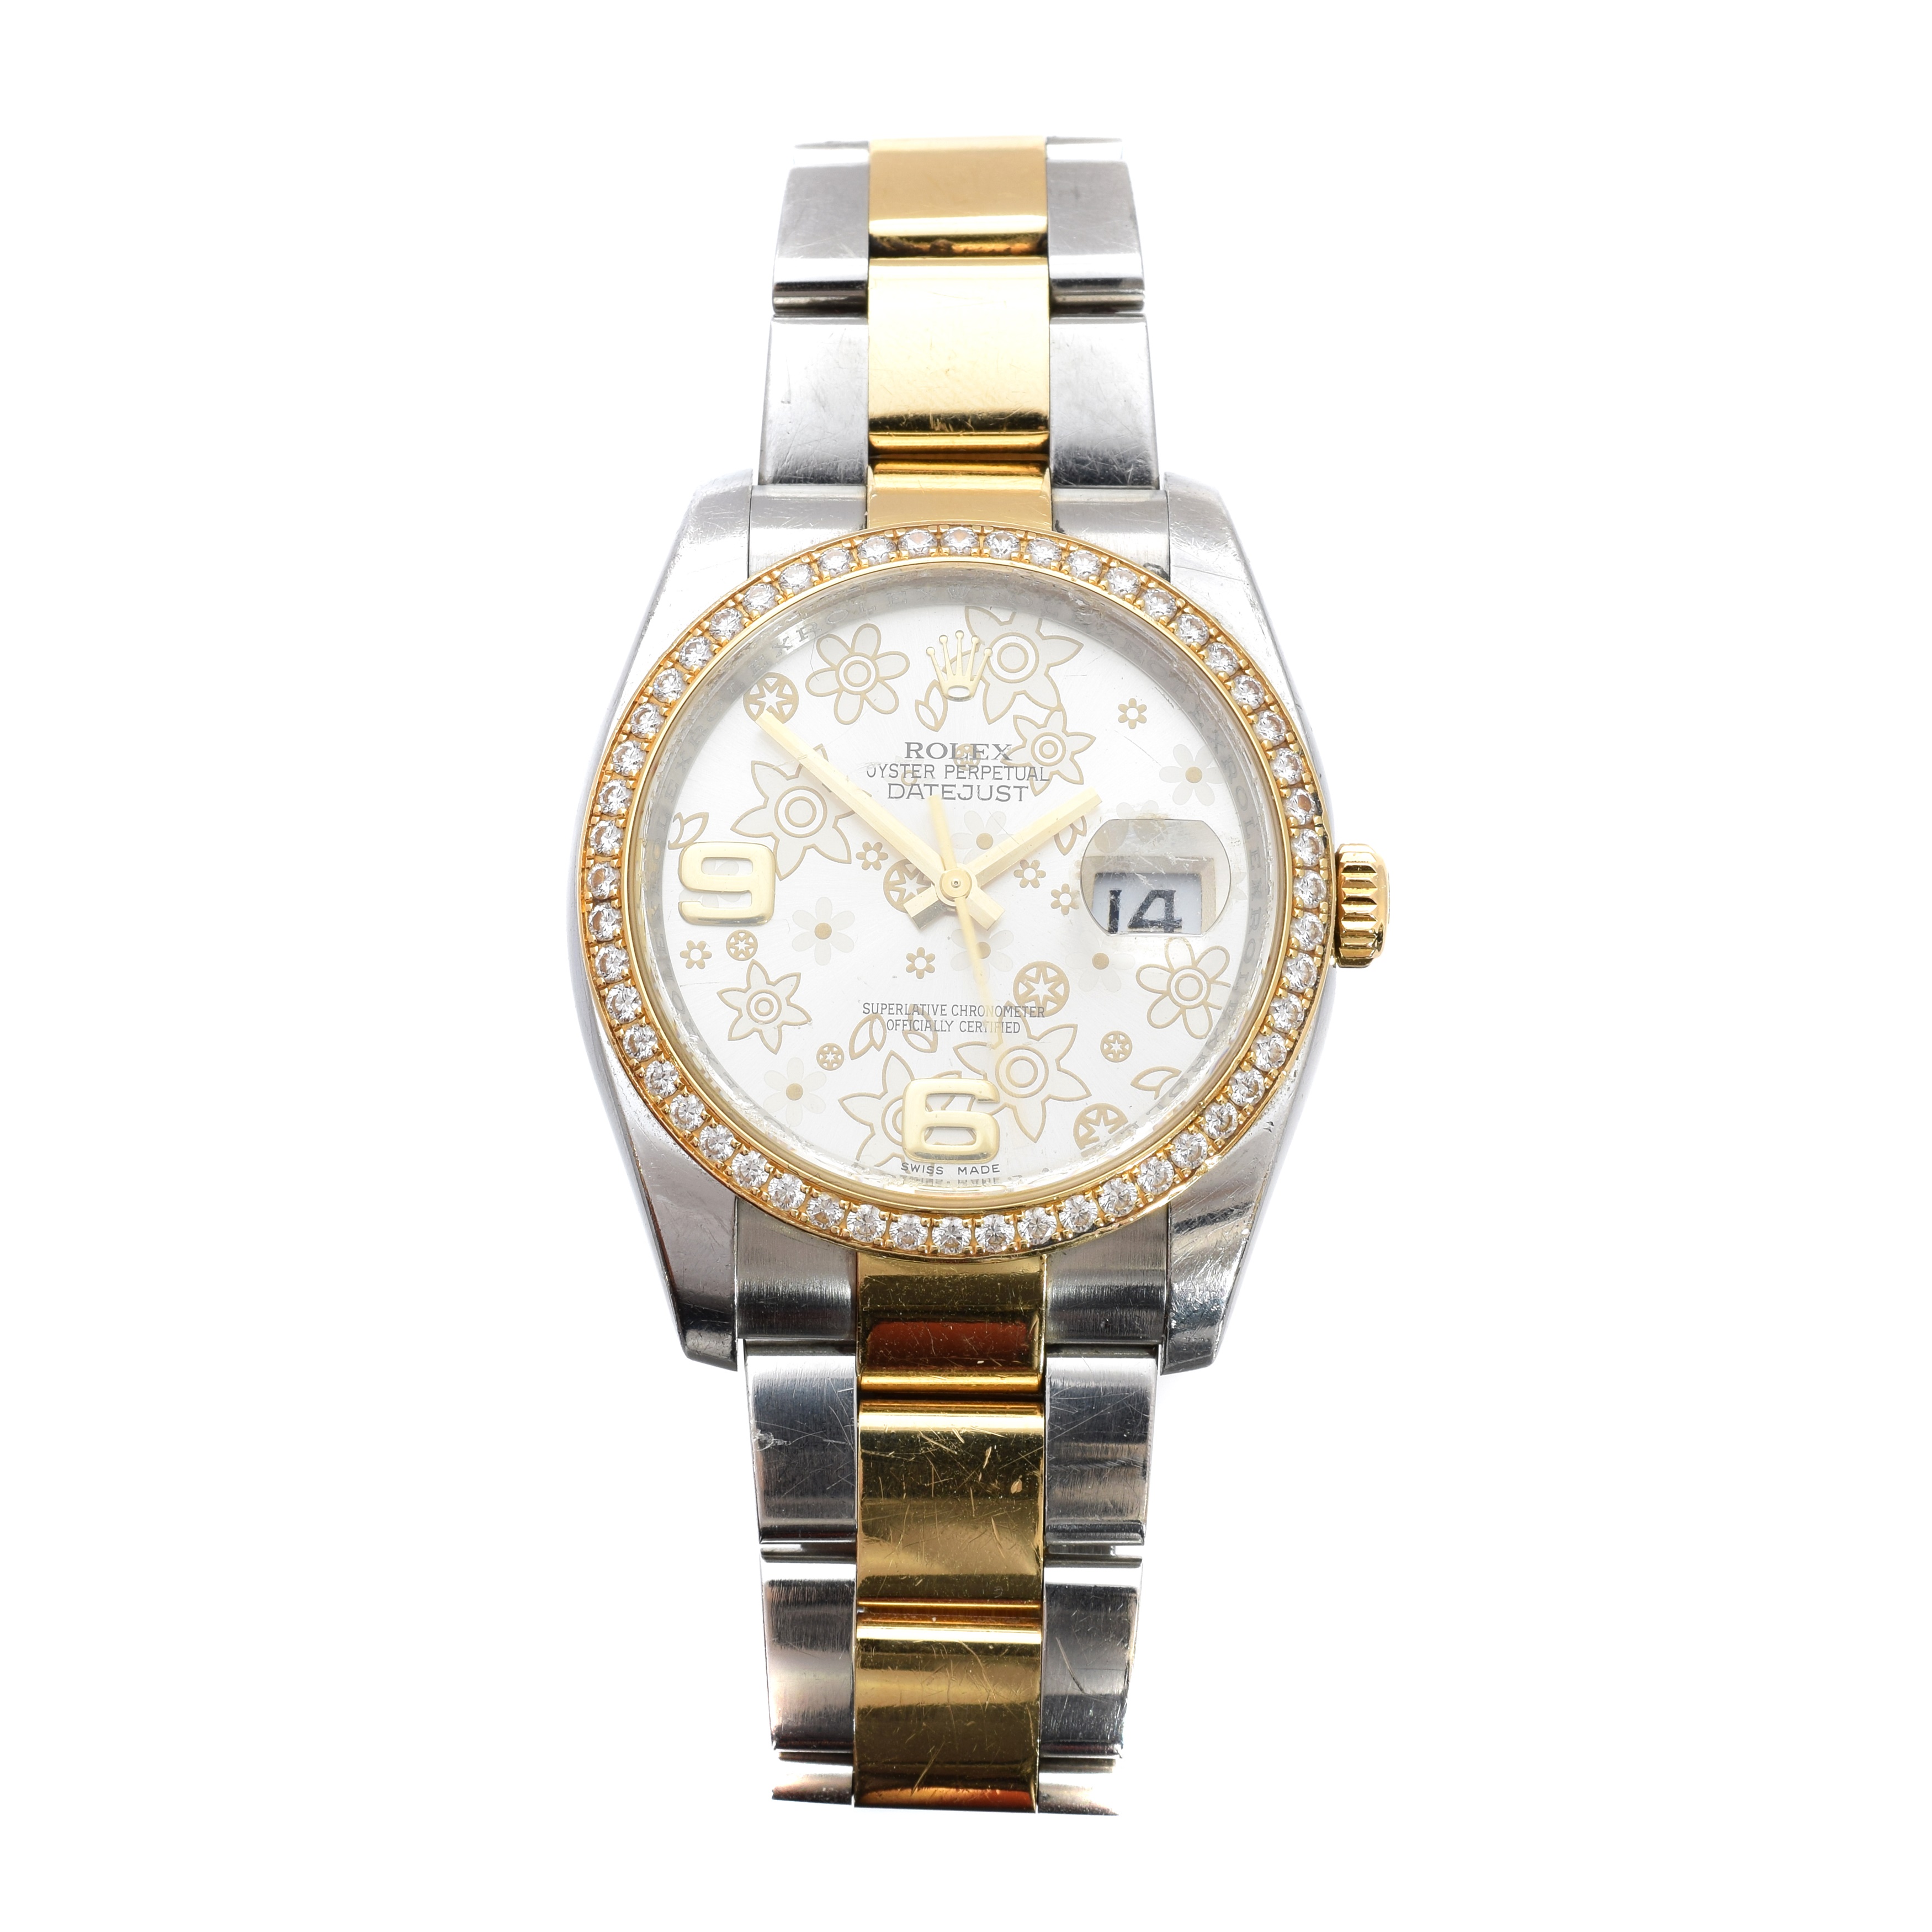 A steel and gold Rolex Oyster Perpetual Datejust wristwatch, circa 2008-9, sold £5,200